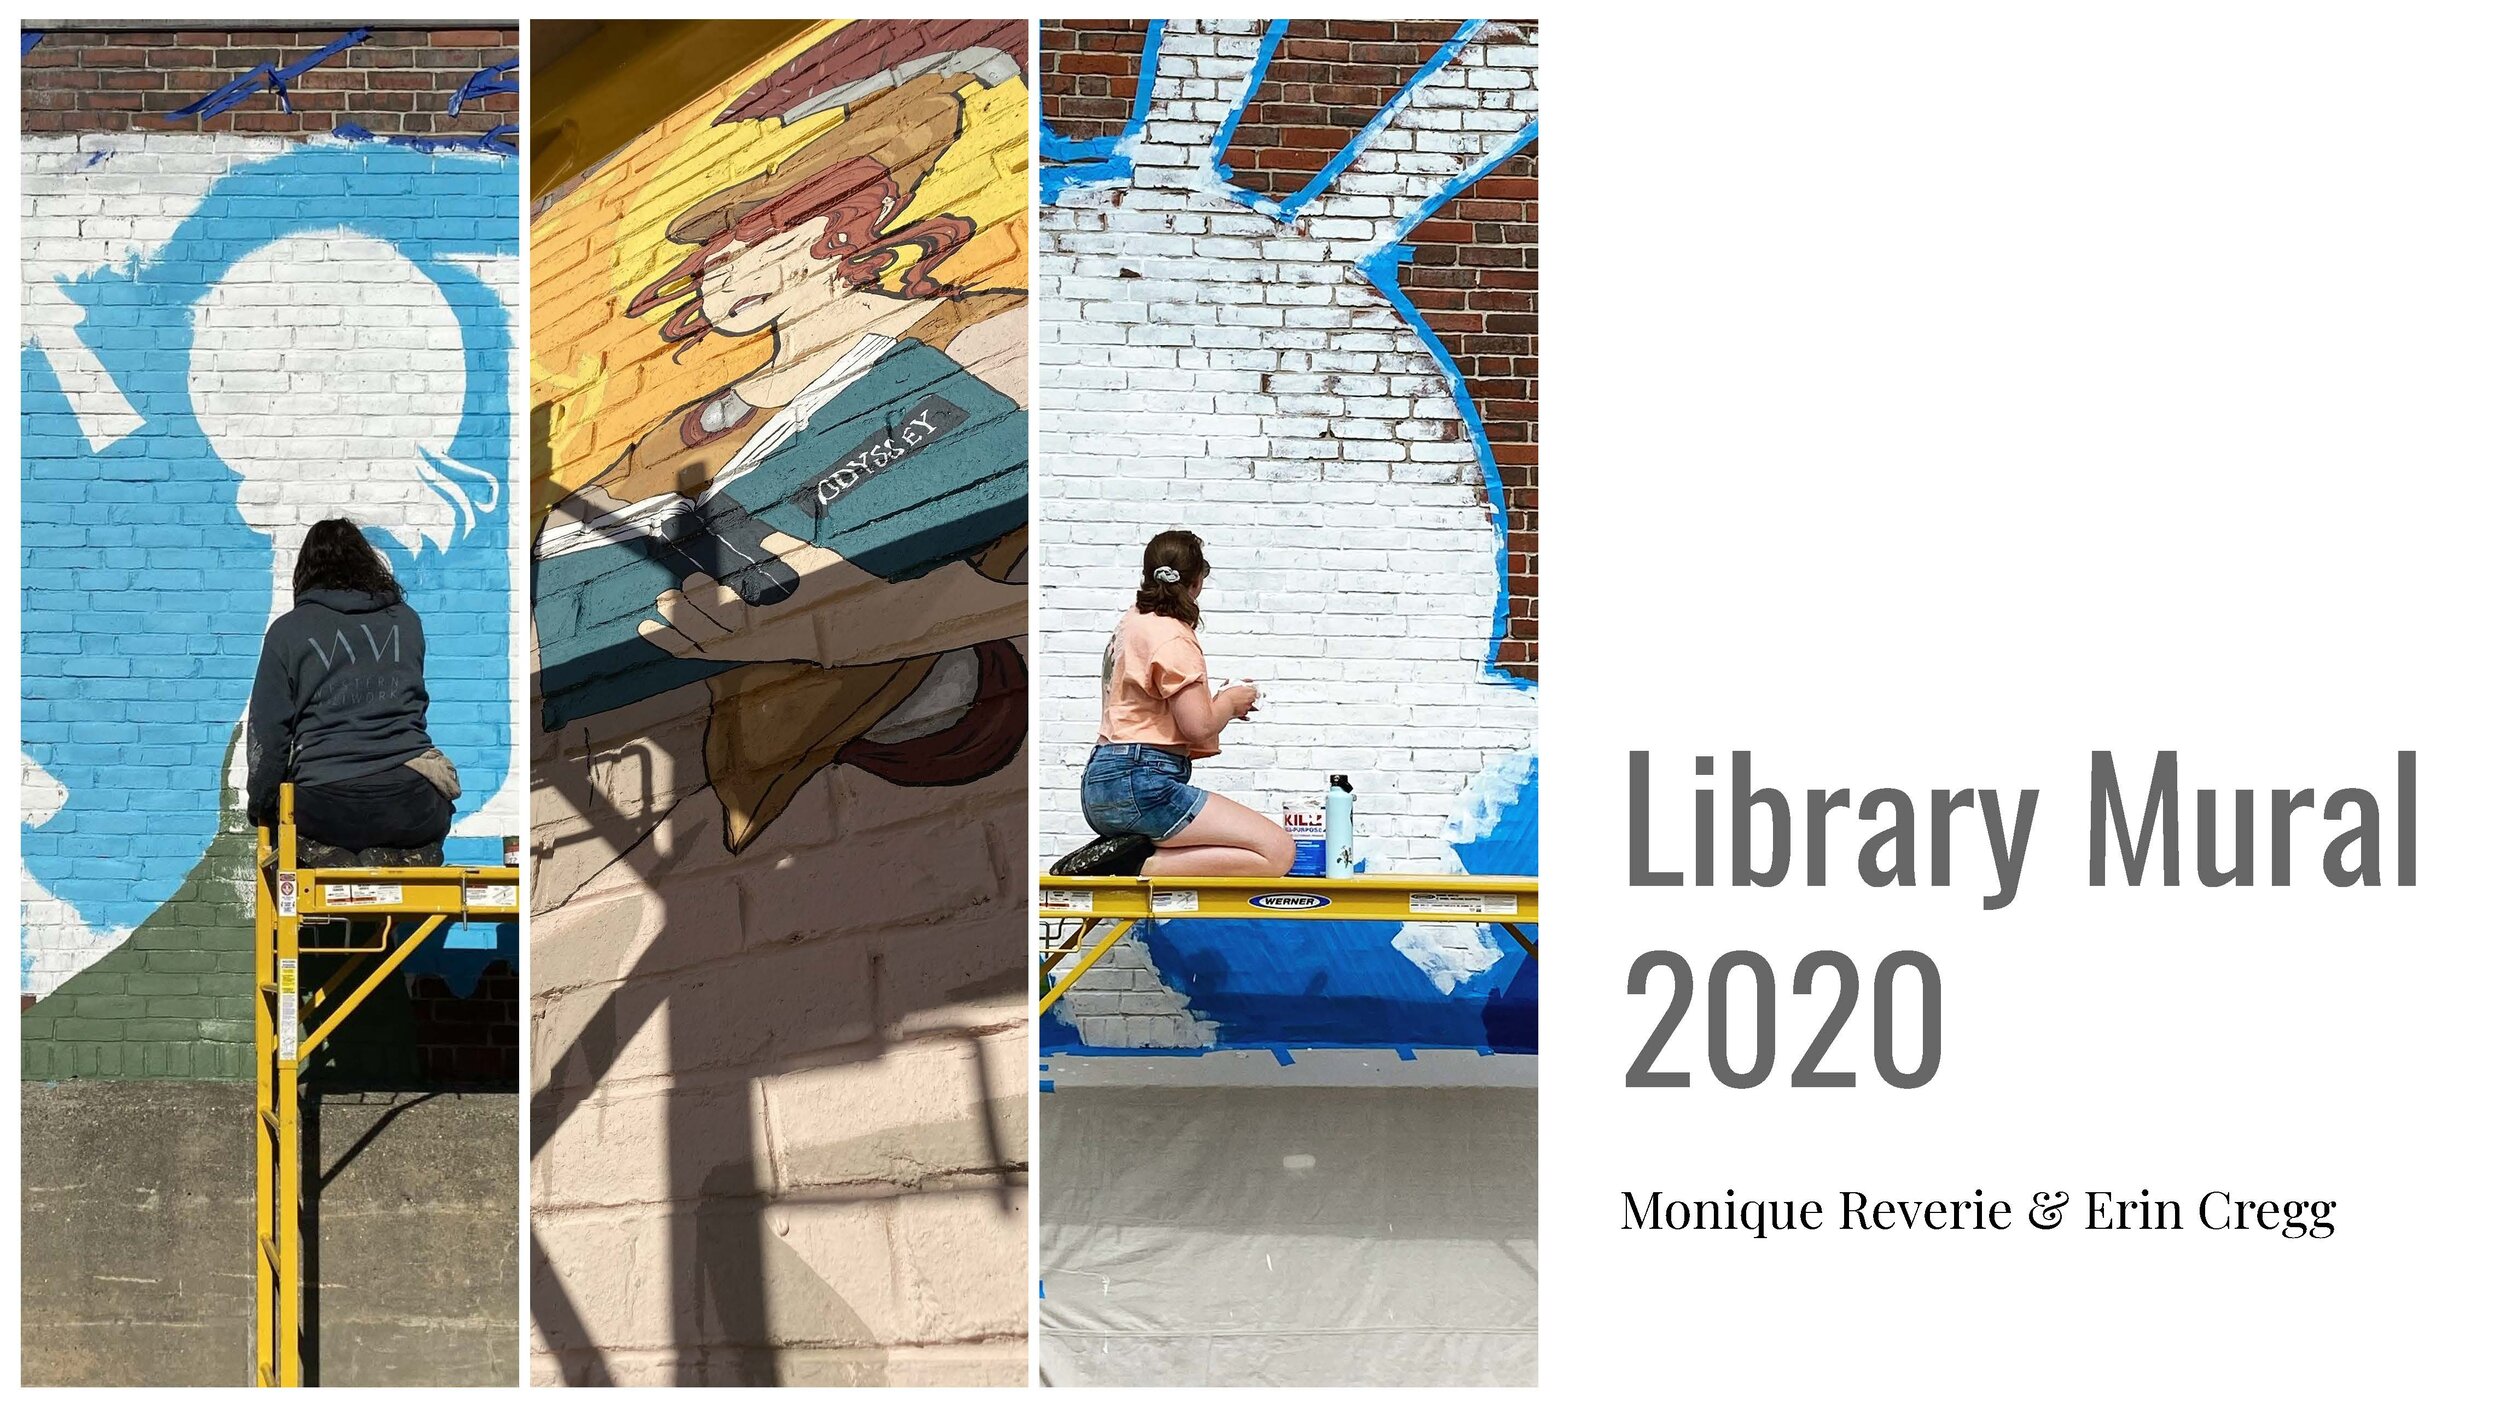 Fitchburg Library Mural 2020 Monique Guthrie, Erin Cregg_Page_01.jpg